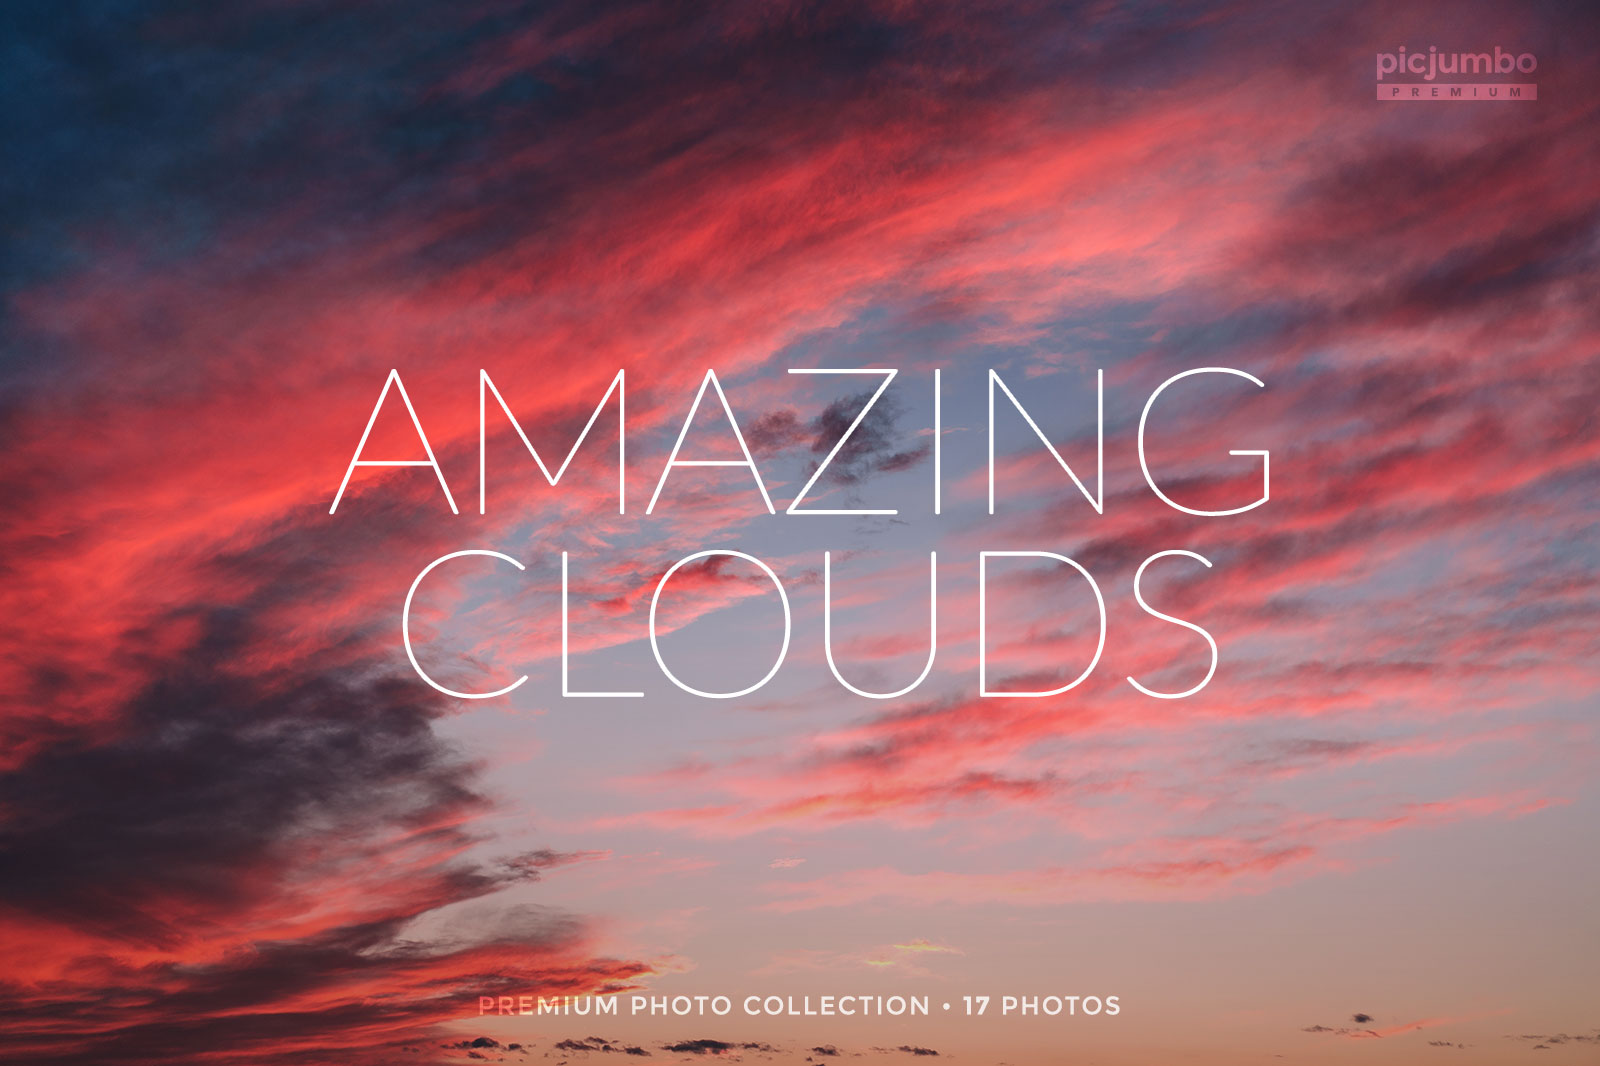 Download hi-res stock photos from our Amazing Clouds PREMIUM Collection!